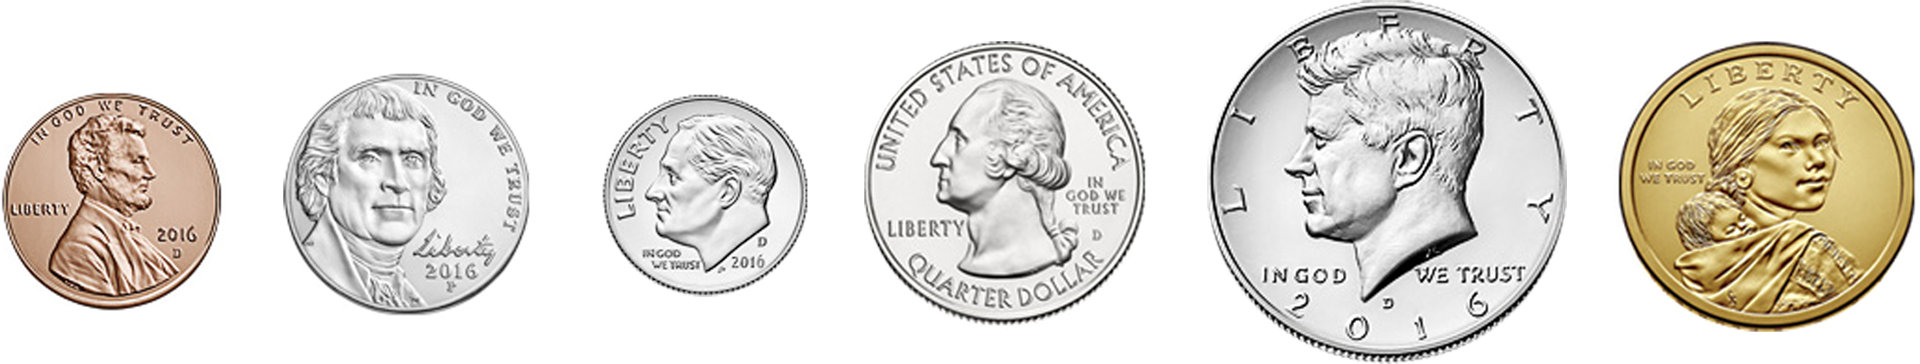 An image of 6 U.S. coins. A penny, nickel, dime, quarter, half dollar, and dollar coin are presented.